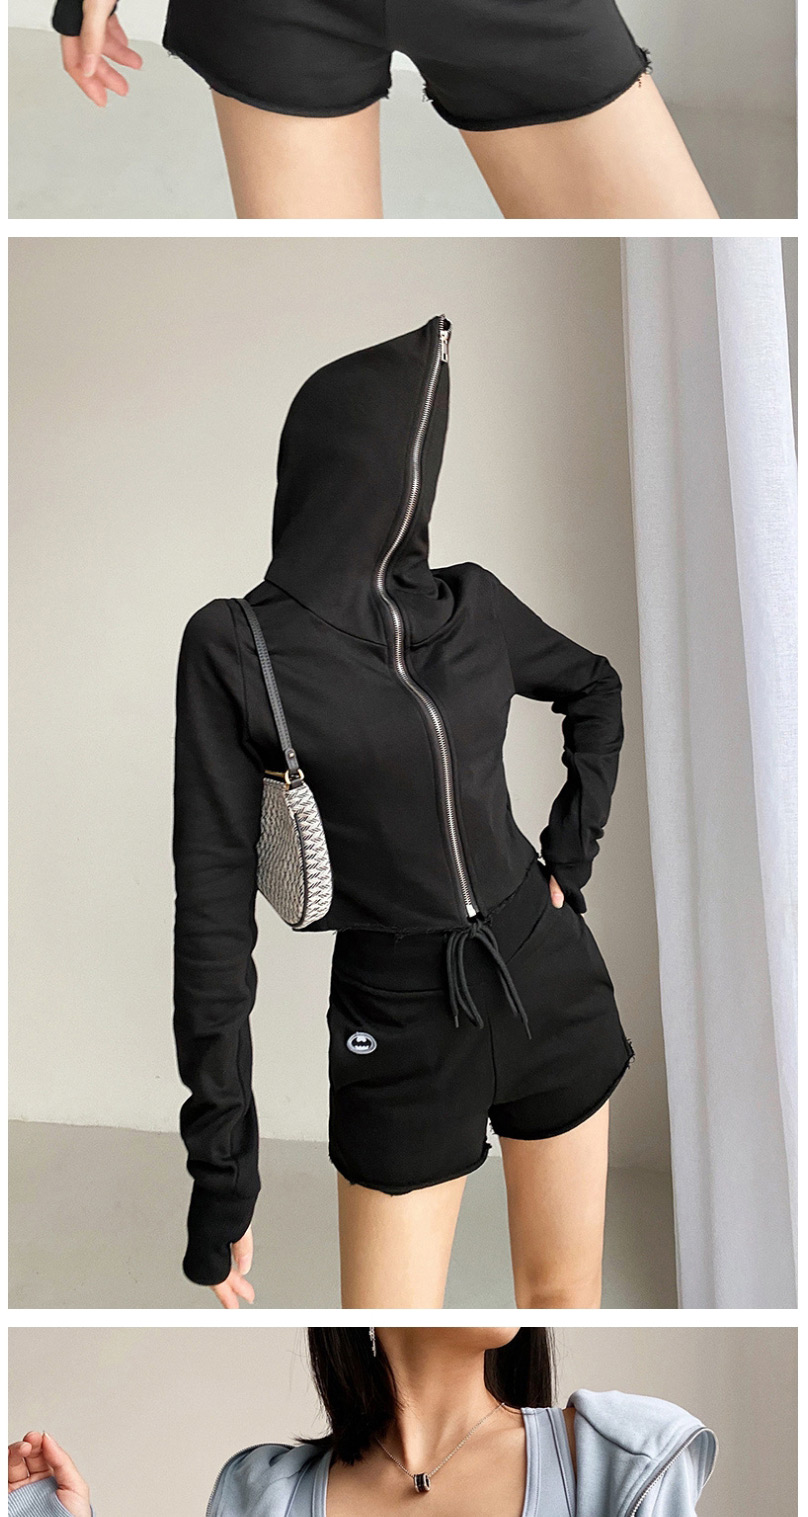 Fashion Blue Solid Color Zipper Hooded Long Sleeve Sweater,Hair Crown